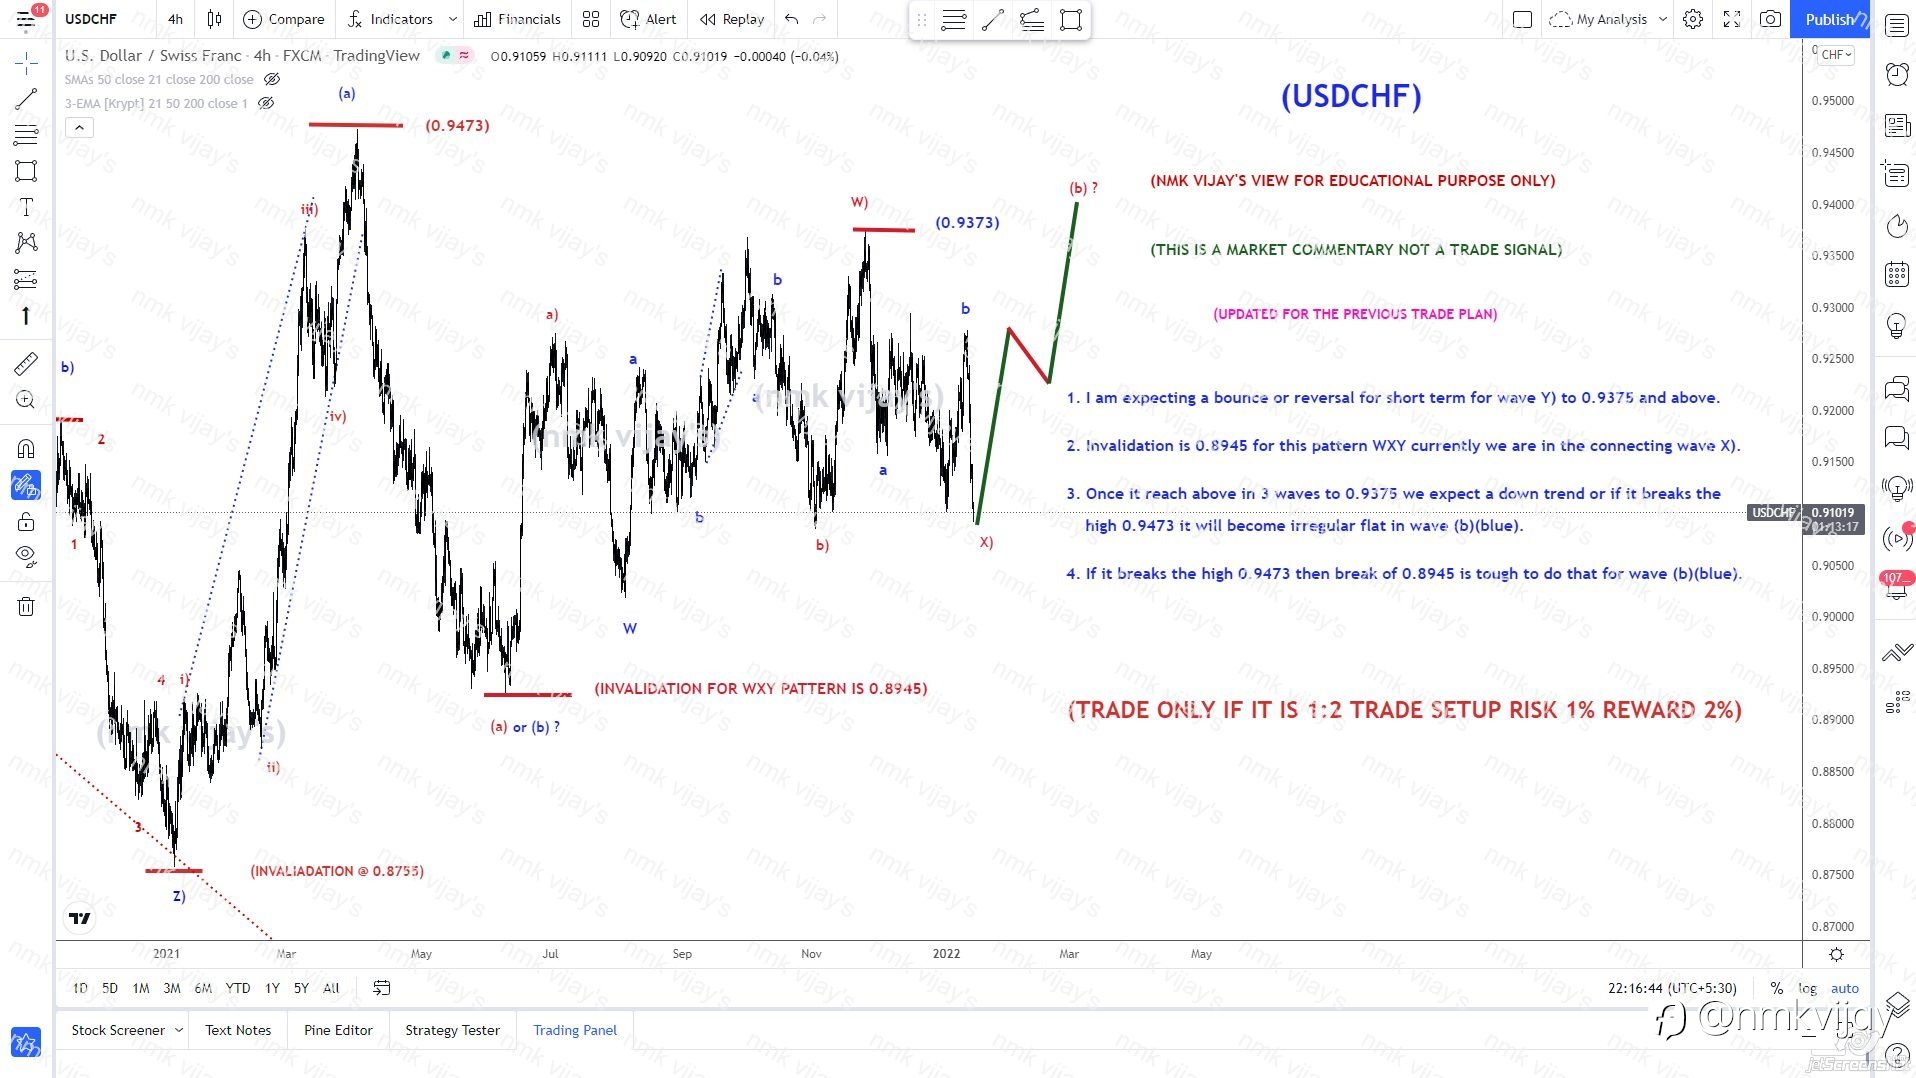 USDCHF-We are in connecting wave X) Y) to 0.9340 and above...